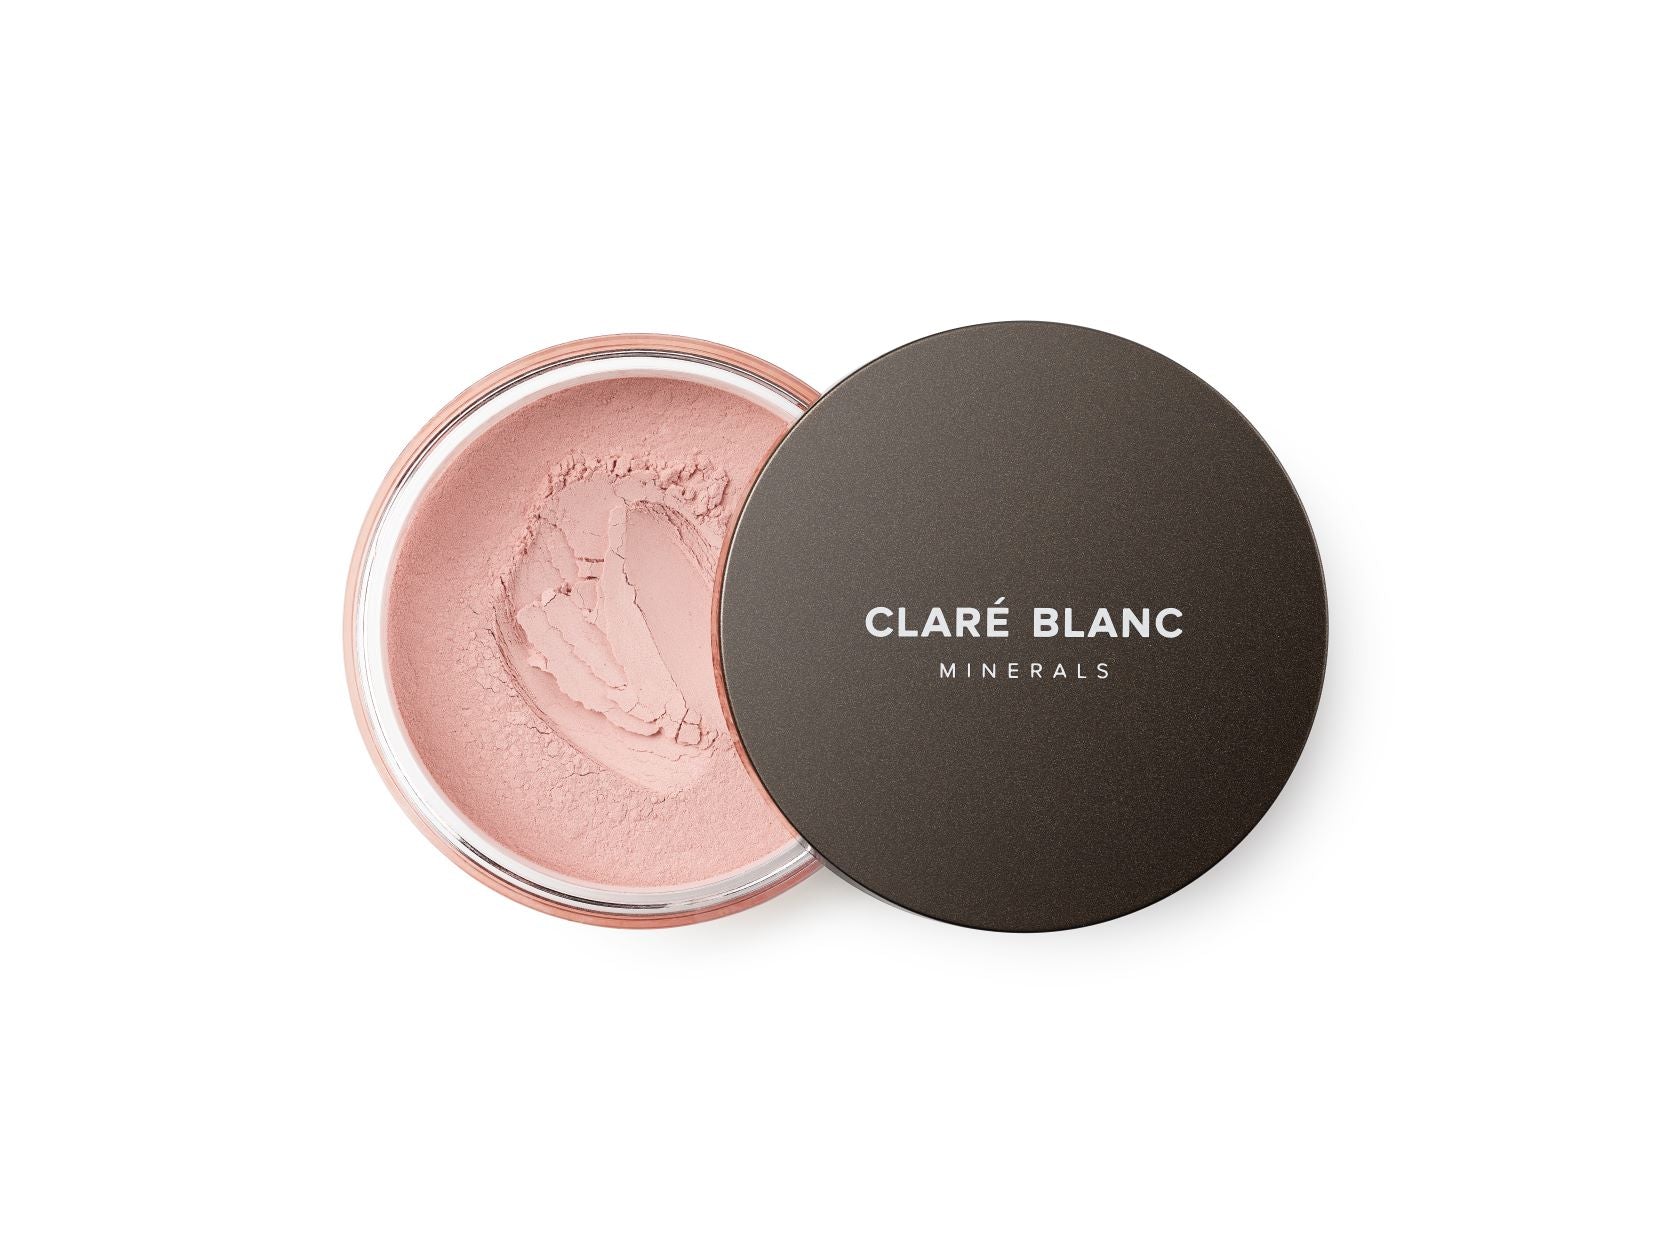 ＜SALE＞CLARE BLANC ミネラルチーク 706 Feather